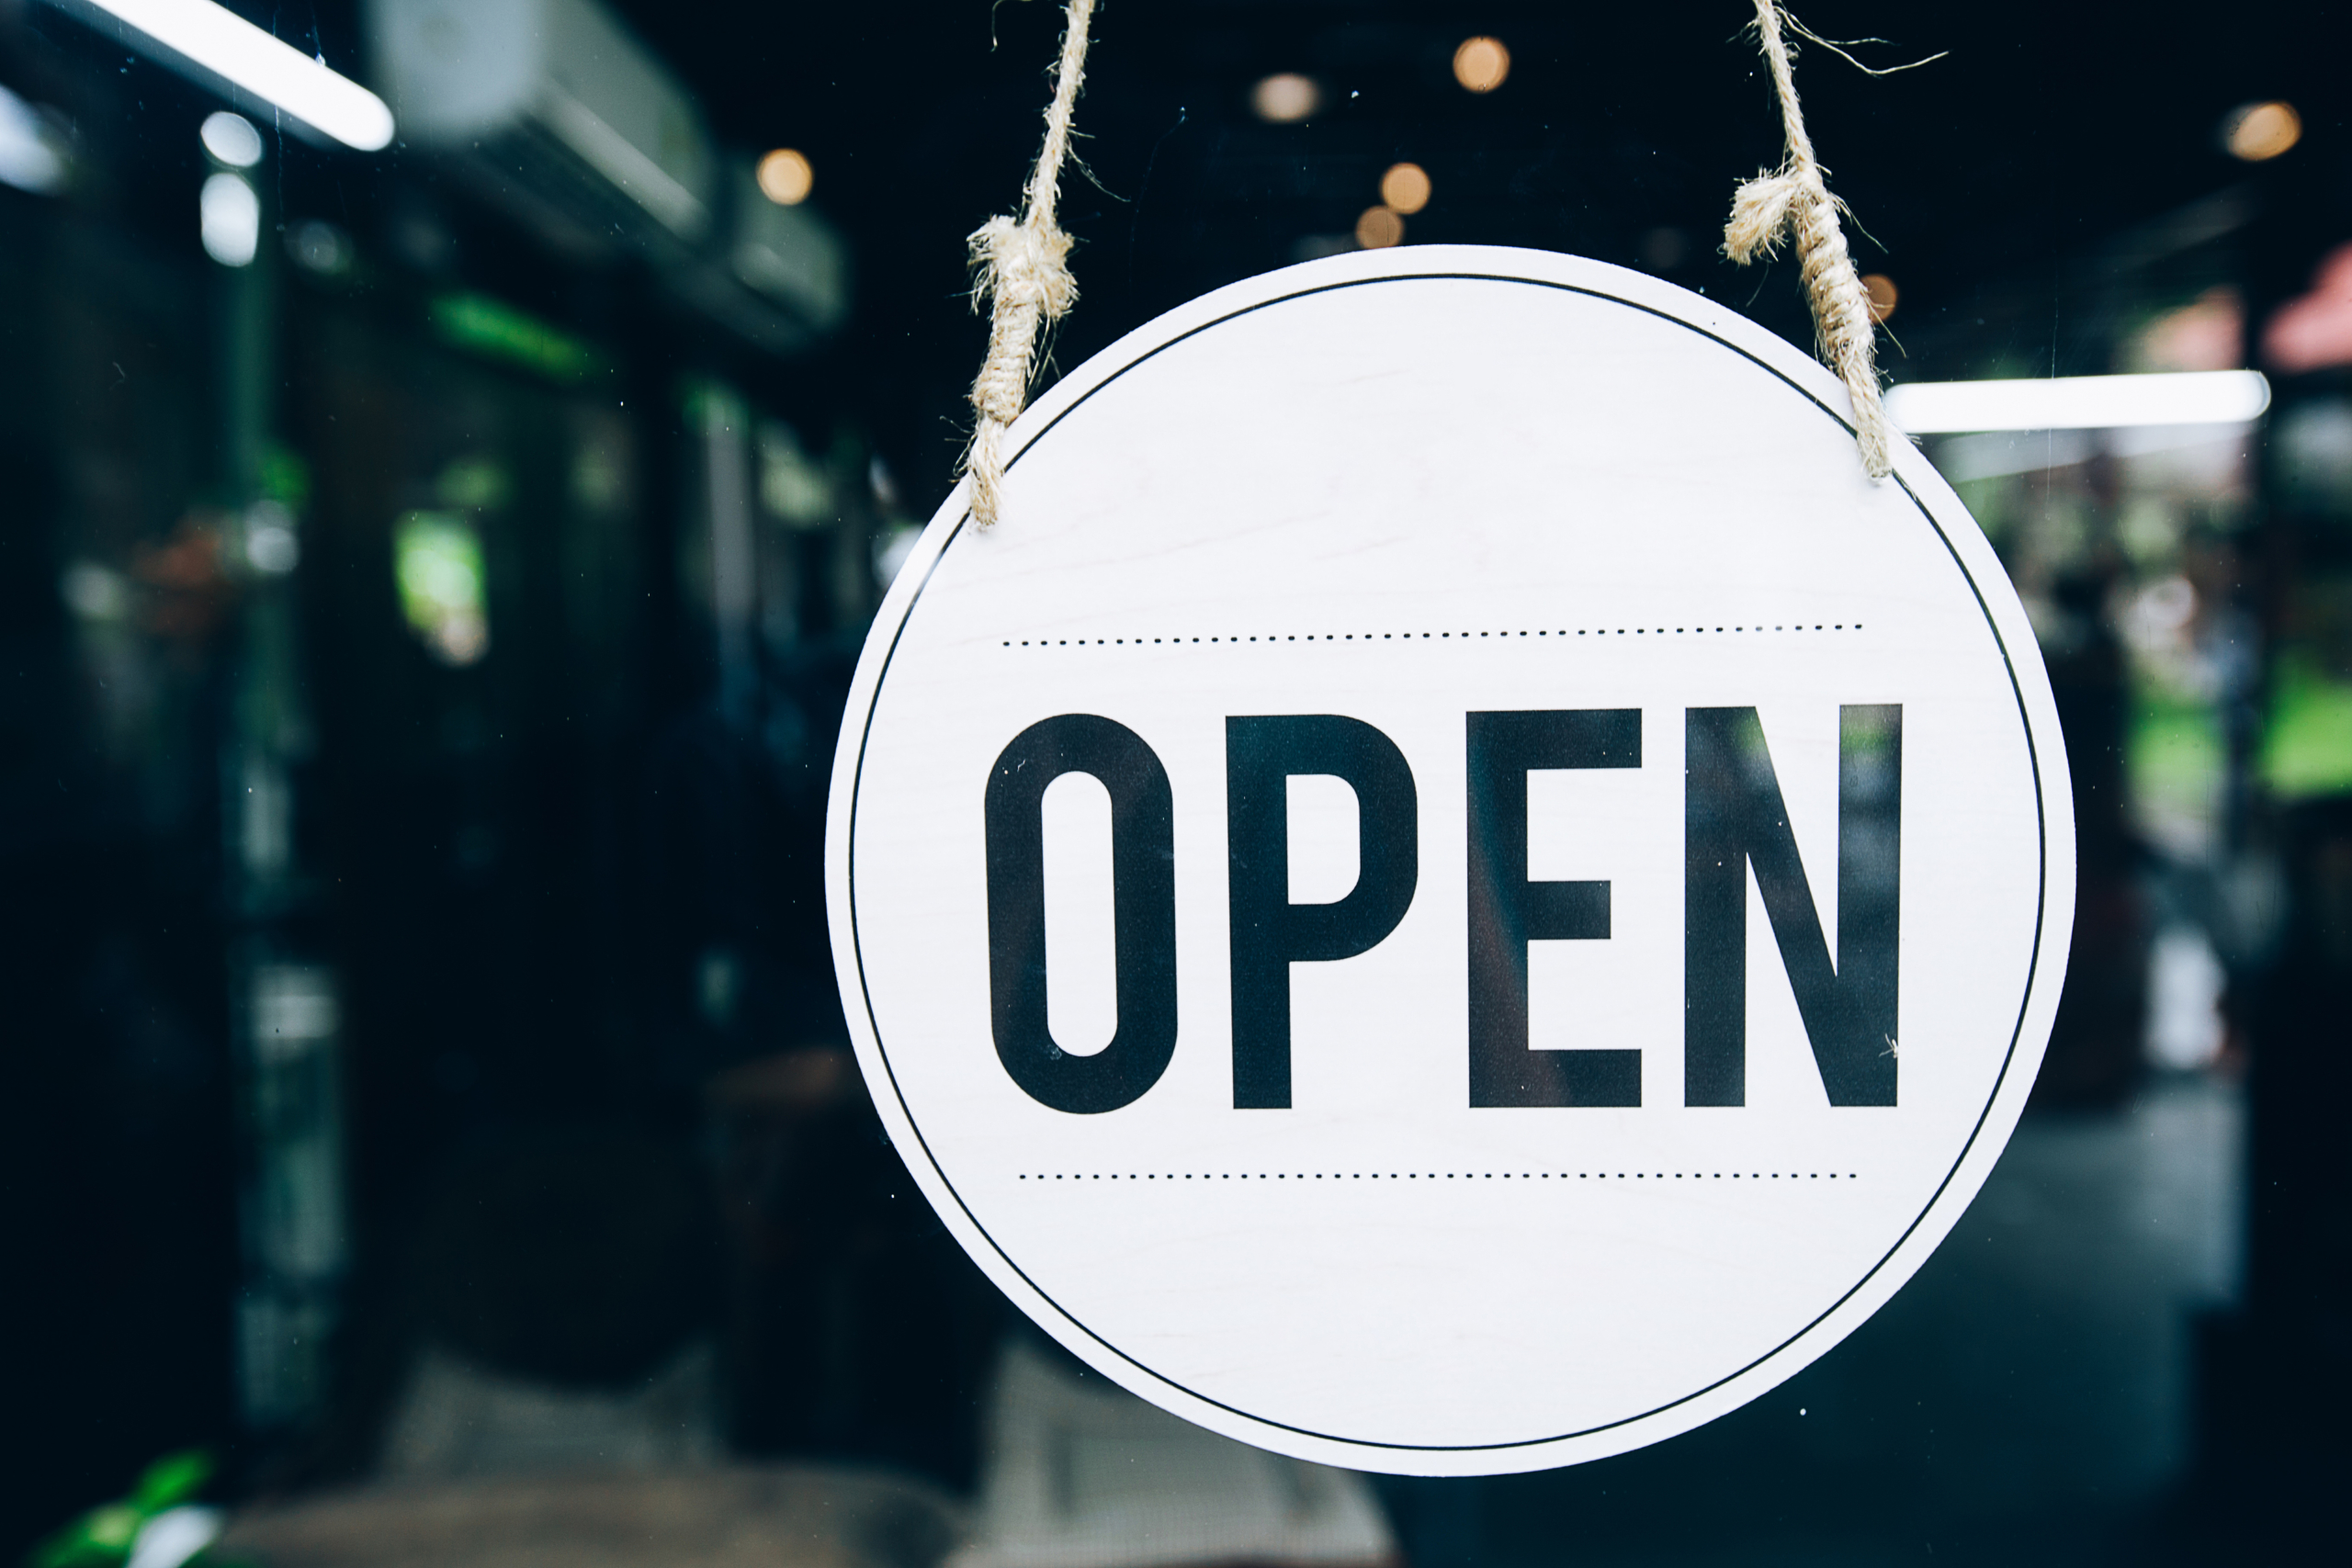 The Case for Openness – An Open and Shut Case?